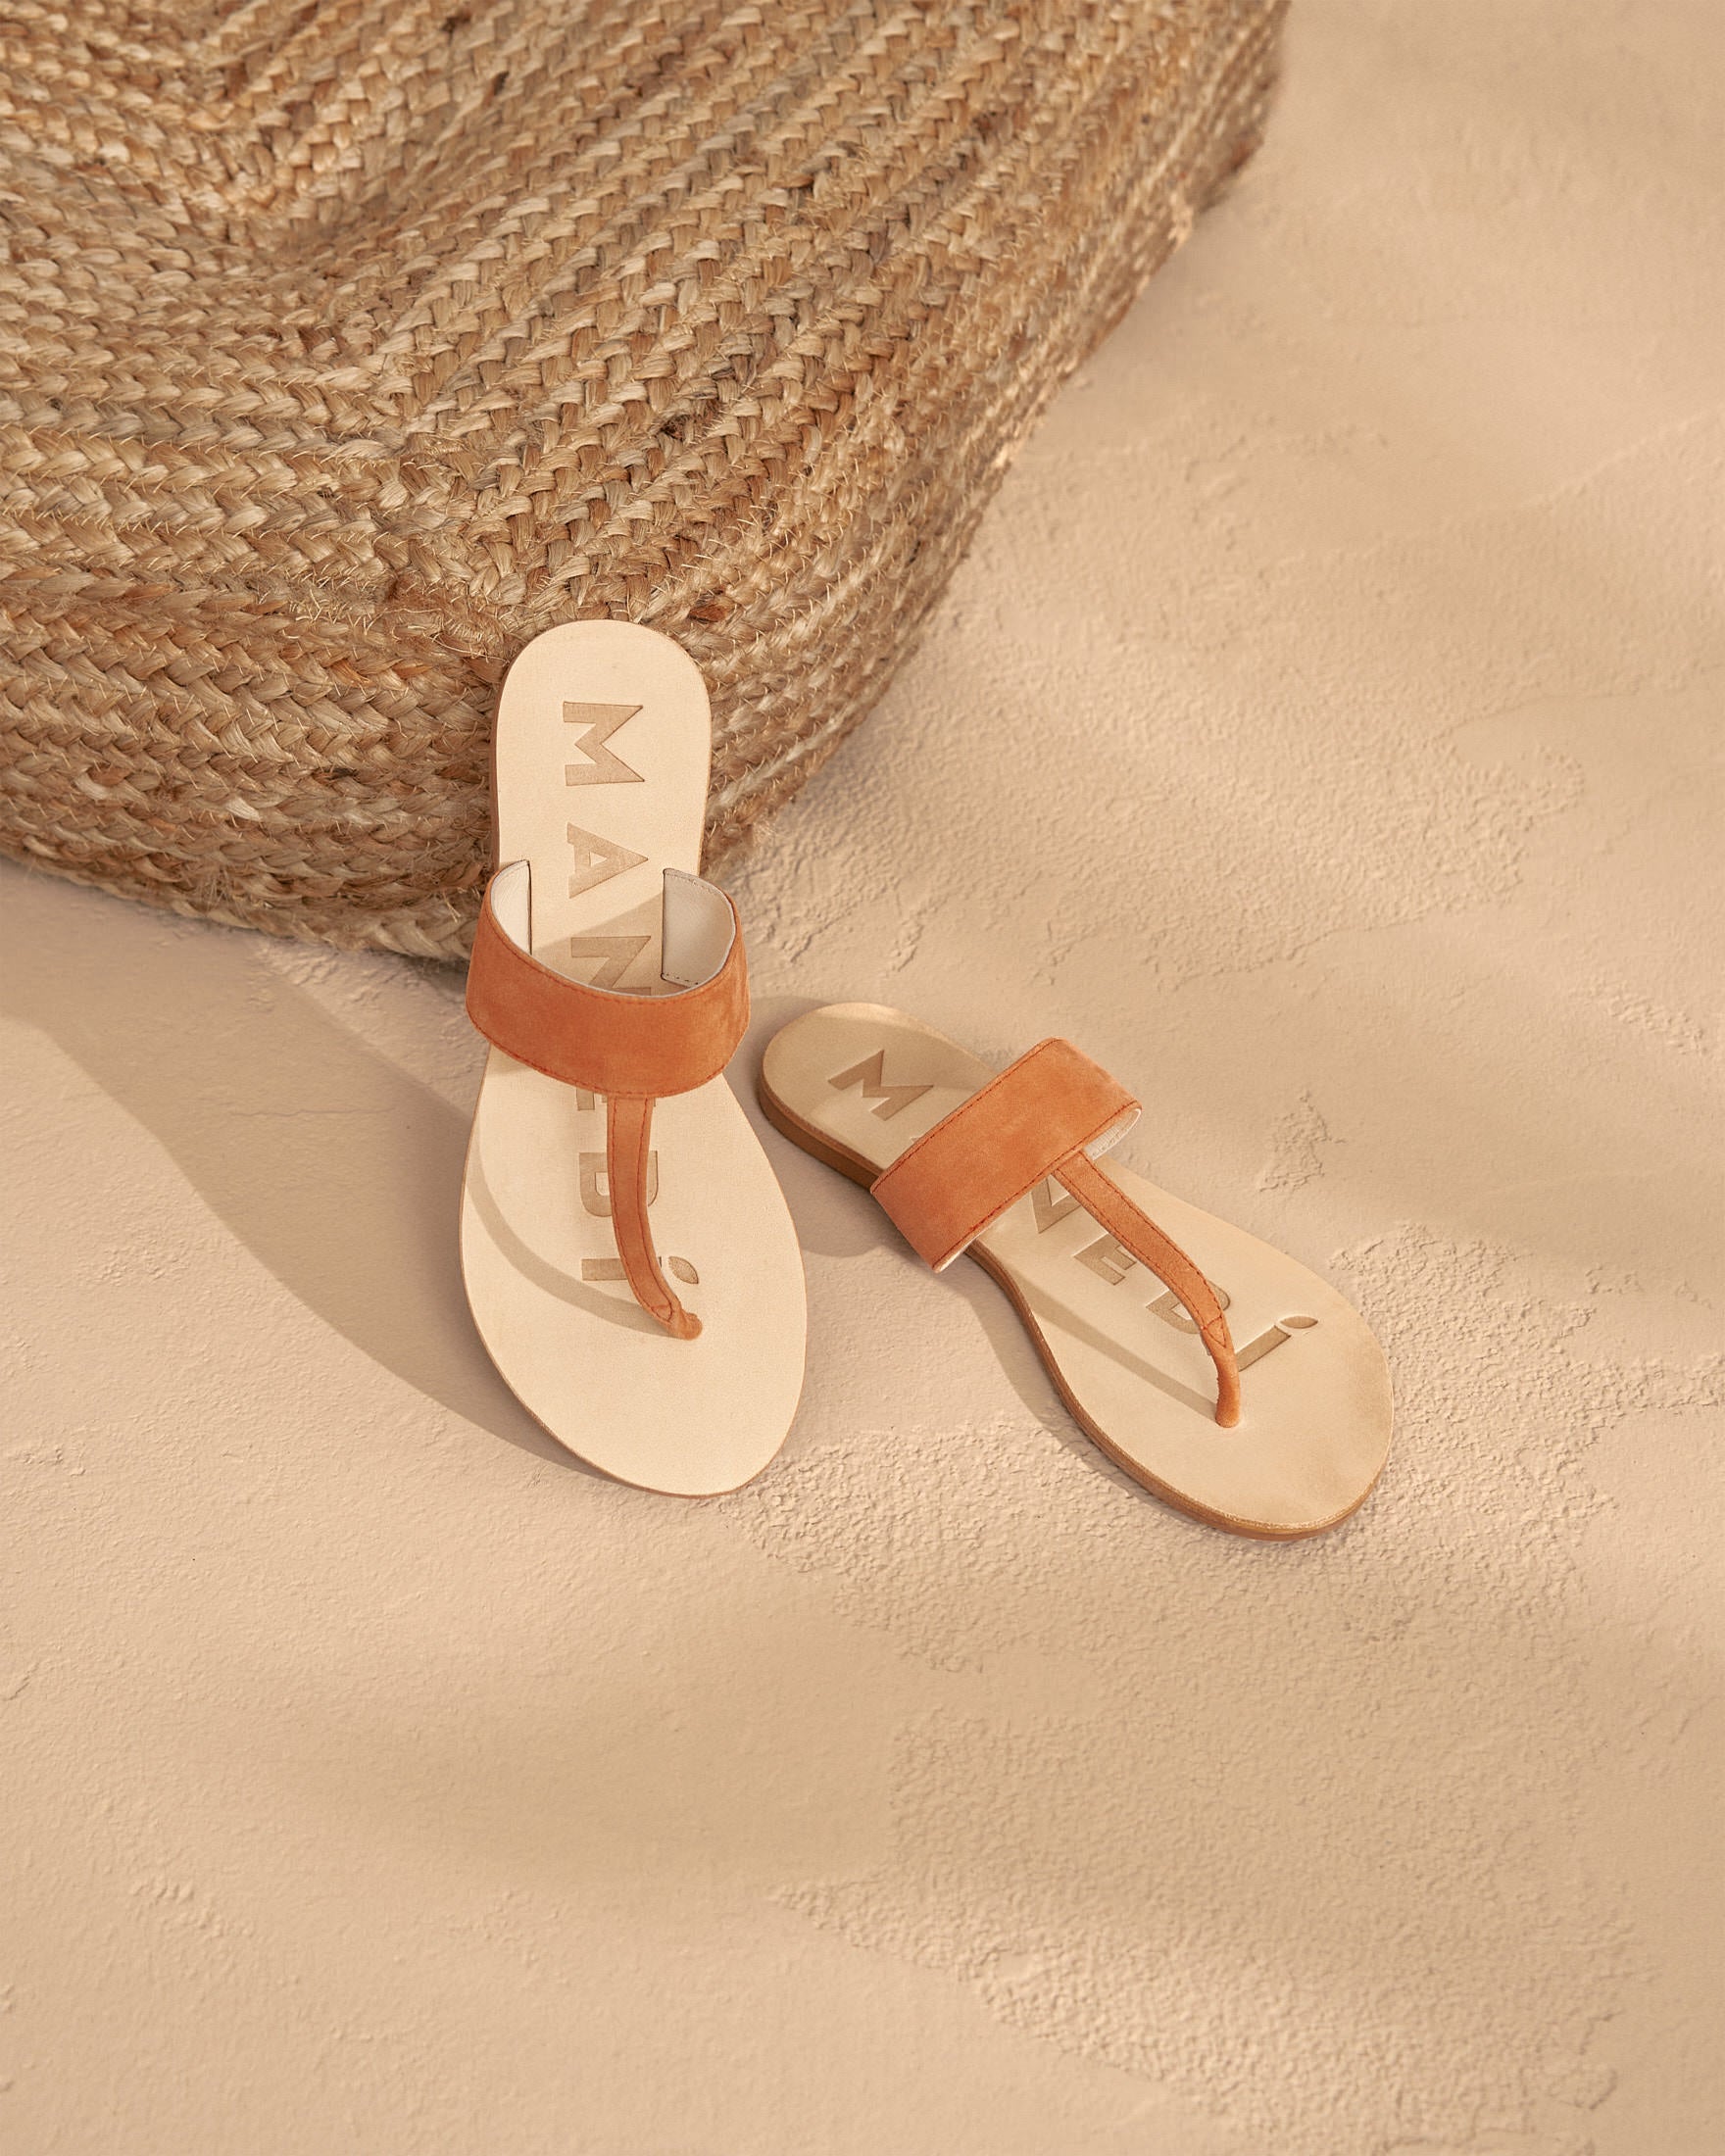 Suede Leather Sandals - Sunset Orange Thongs